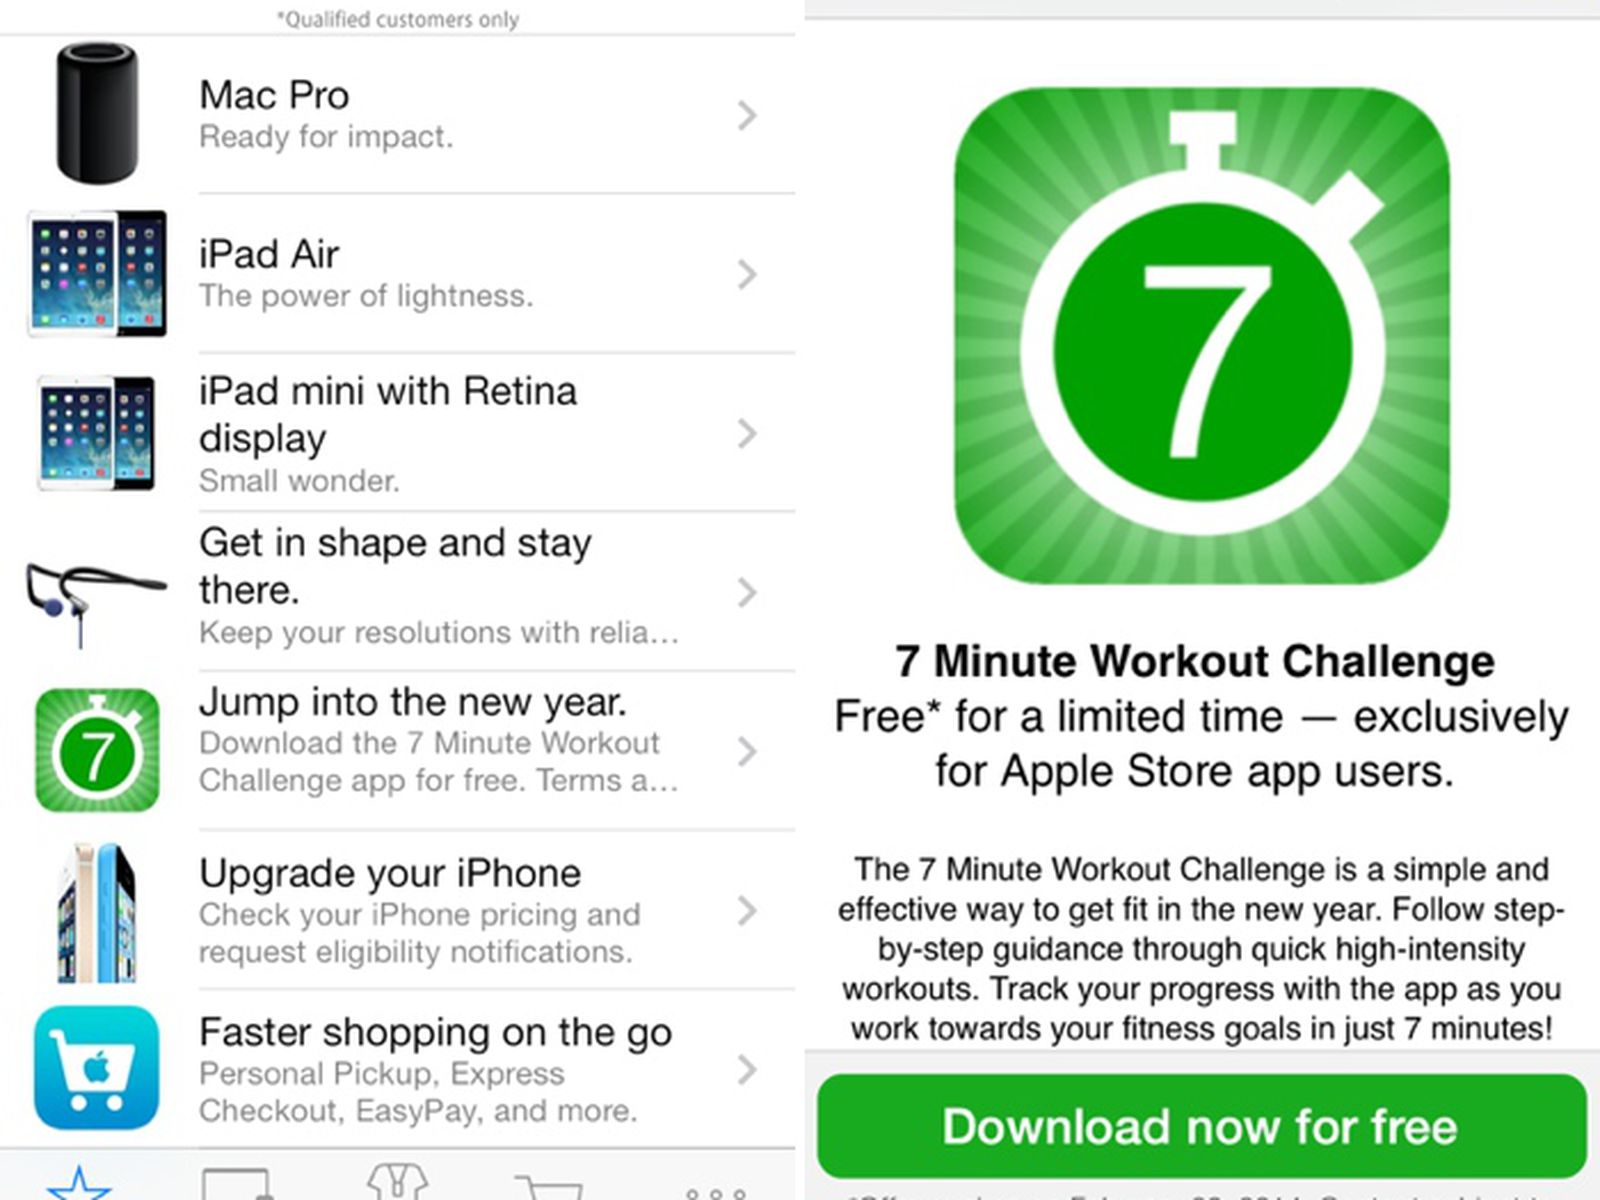 Challenge приложение. Check Phone. 7 Minute Workout. Terms apply